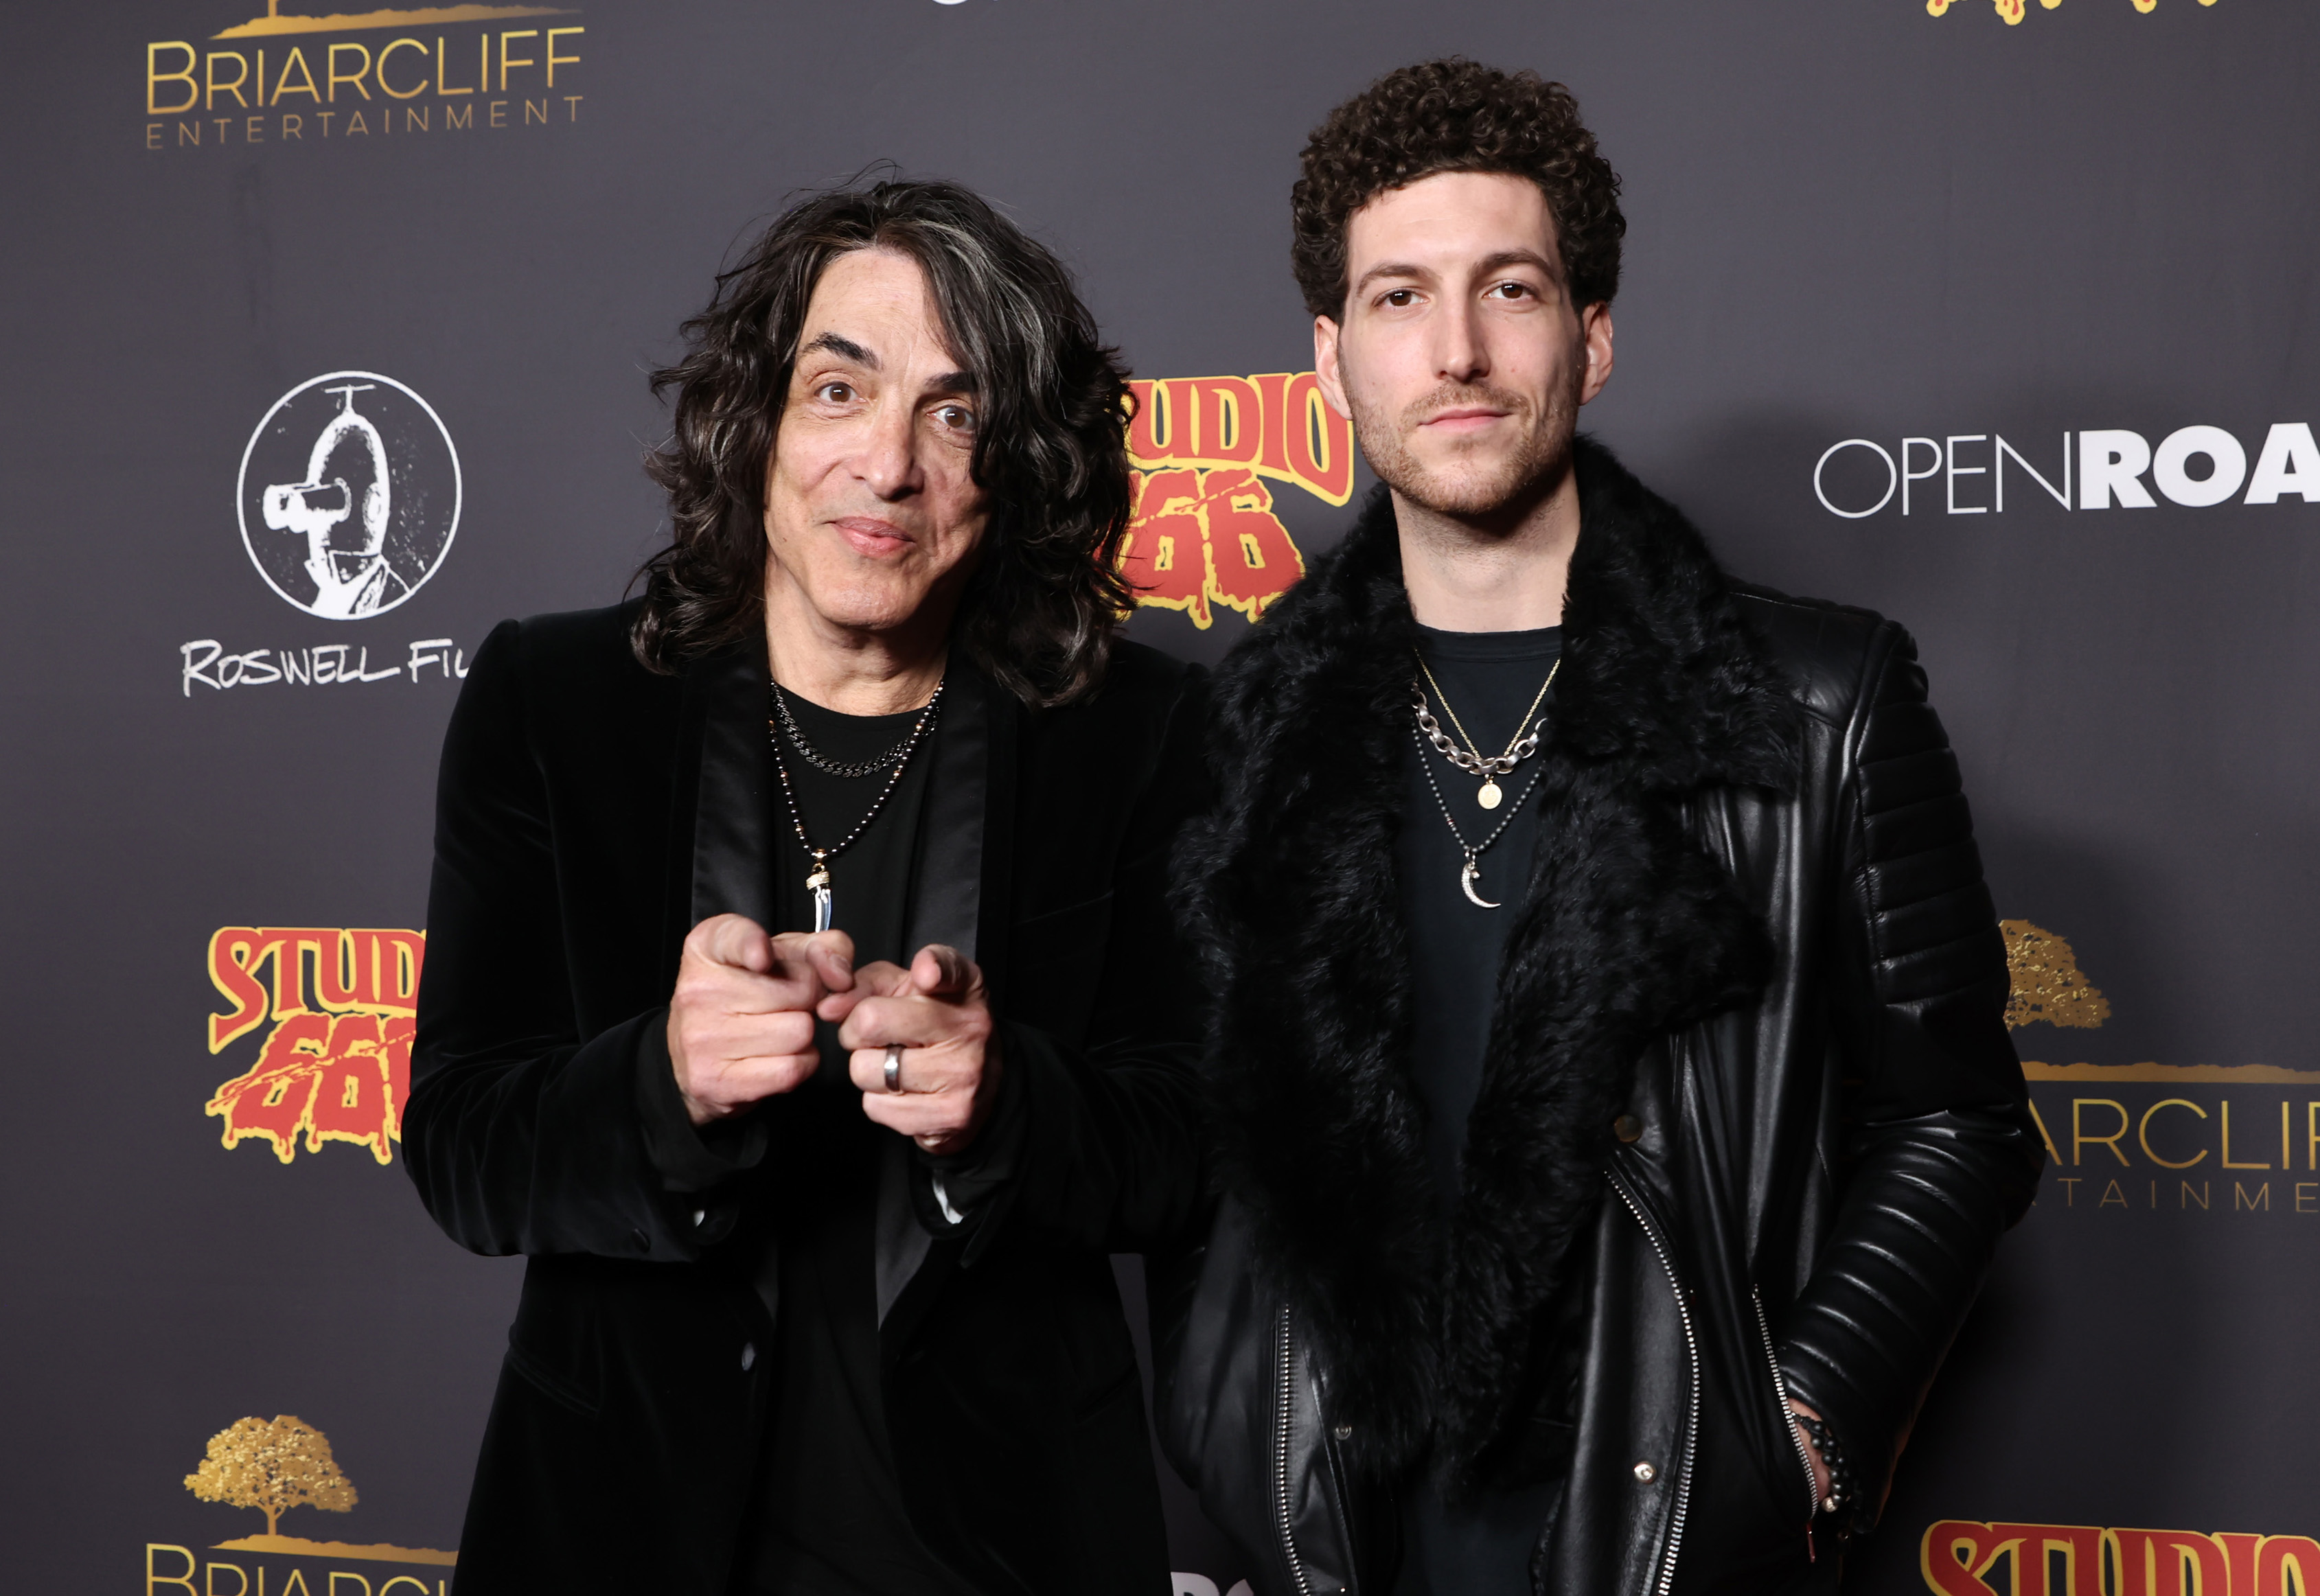 <p>Evan Stanley (who was born in 1994) joined dad Paul Stanley on the red carpet at the premiere of "Studio 666" at the TCL Chinese Theatre in Hollywood on Feb. 16, 2022. Evan is a musician like his father.</p>